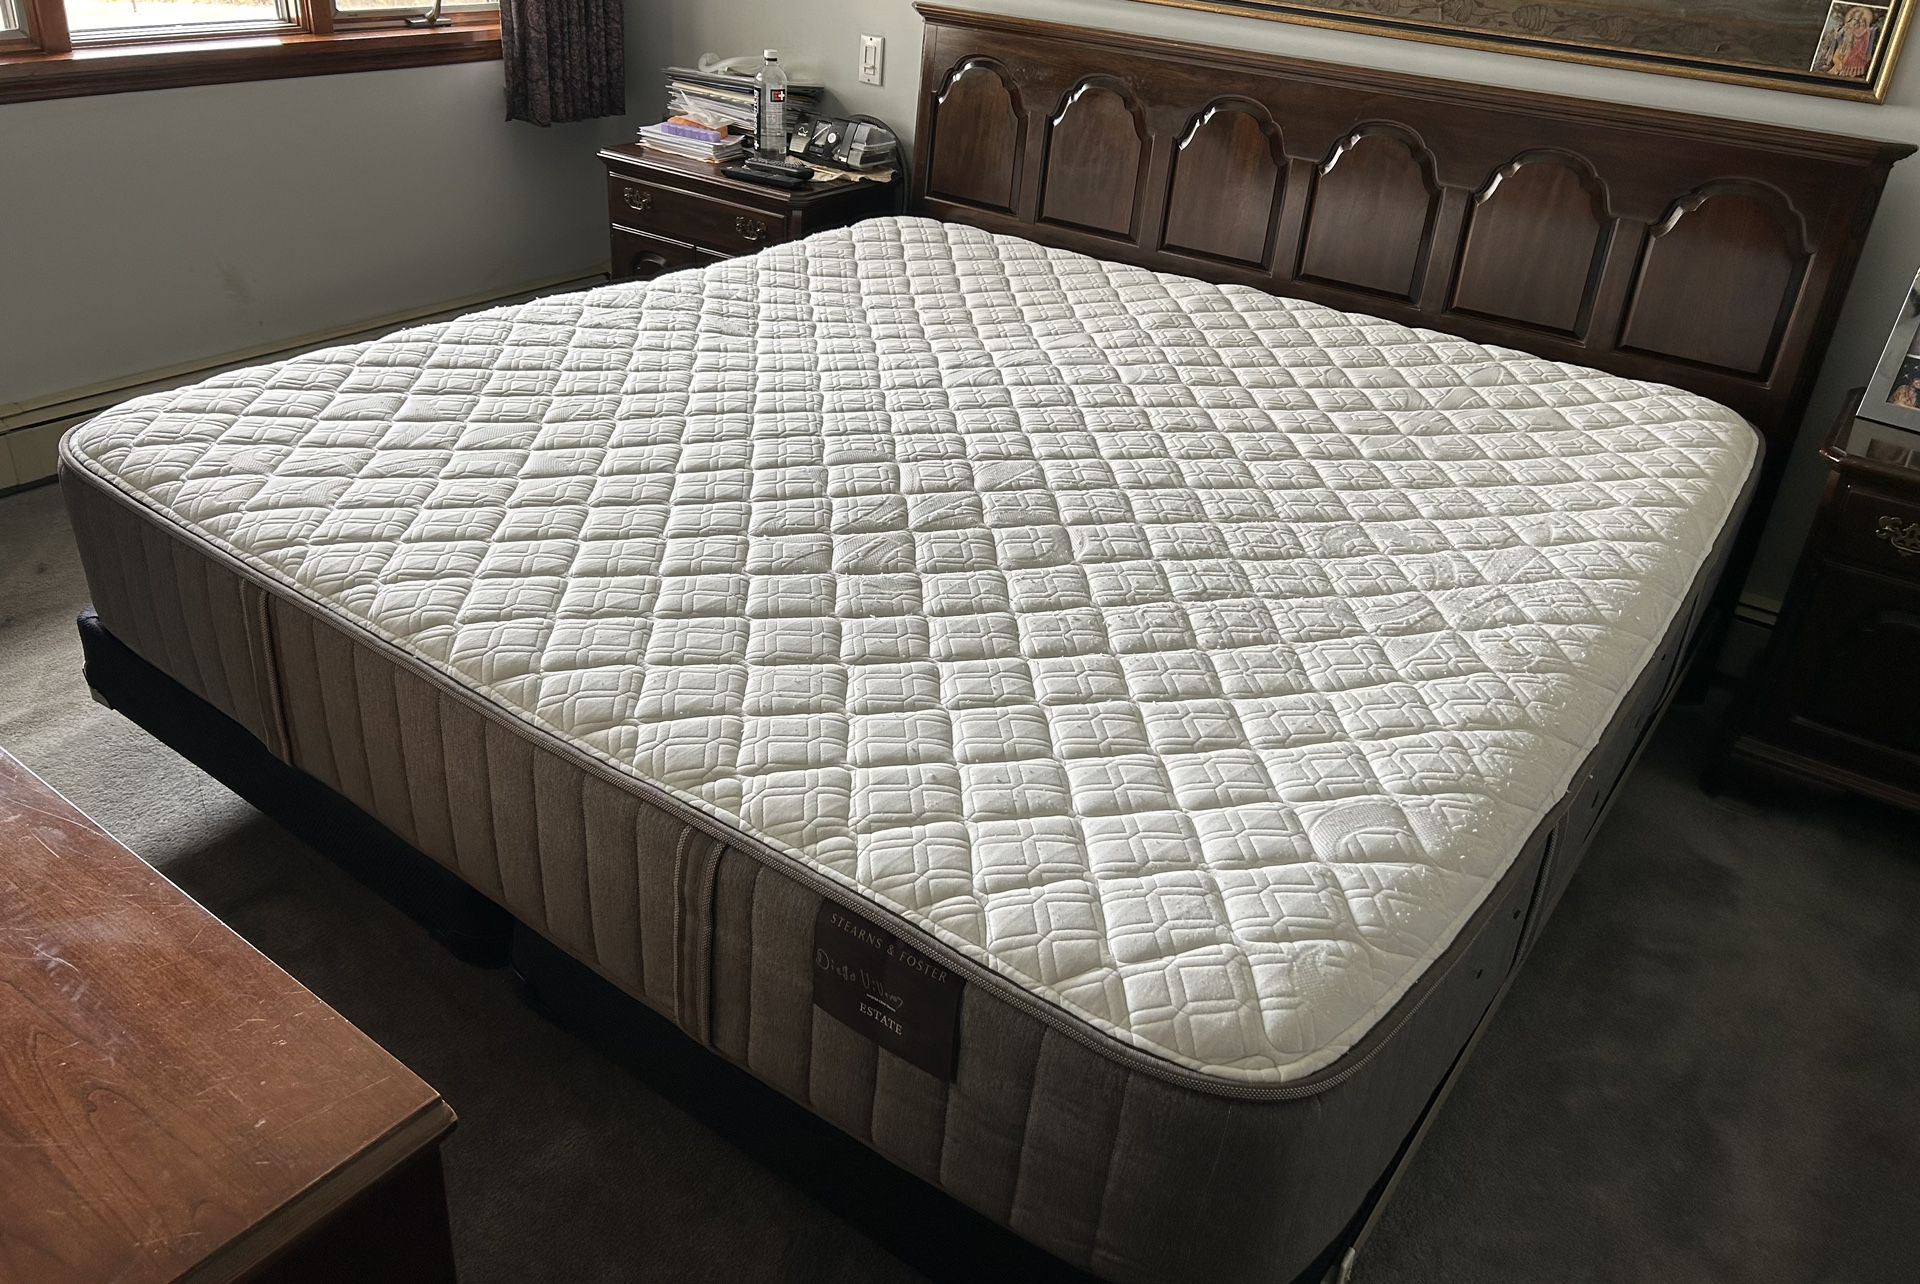 Stearns and Foster Estate Firm King size Mattress with free box springs